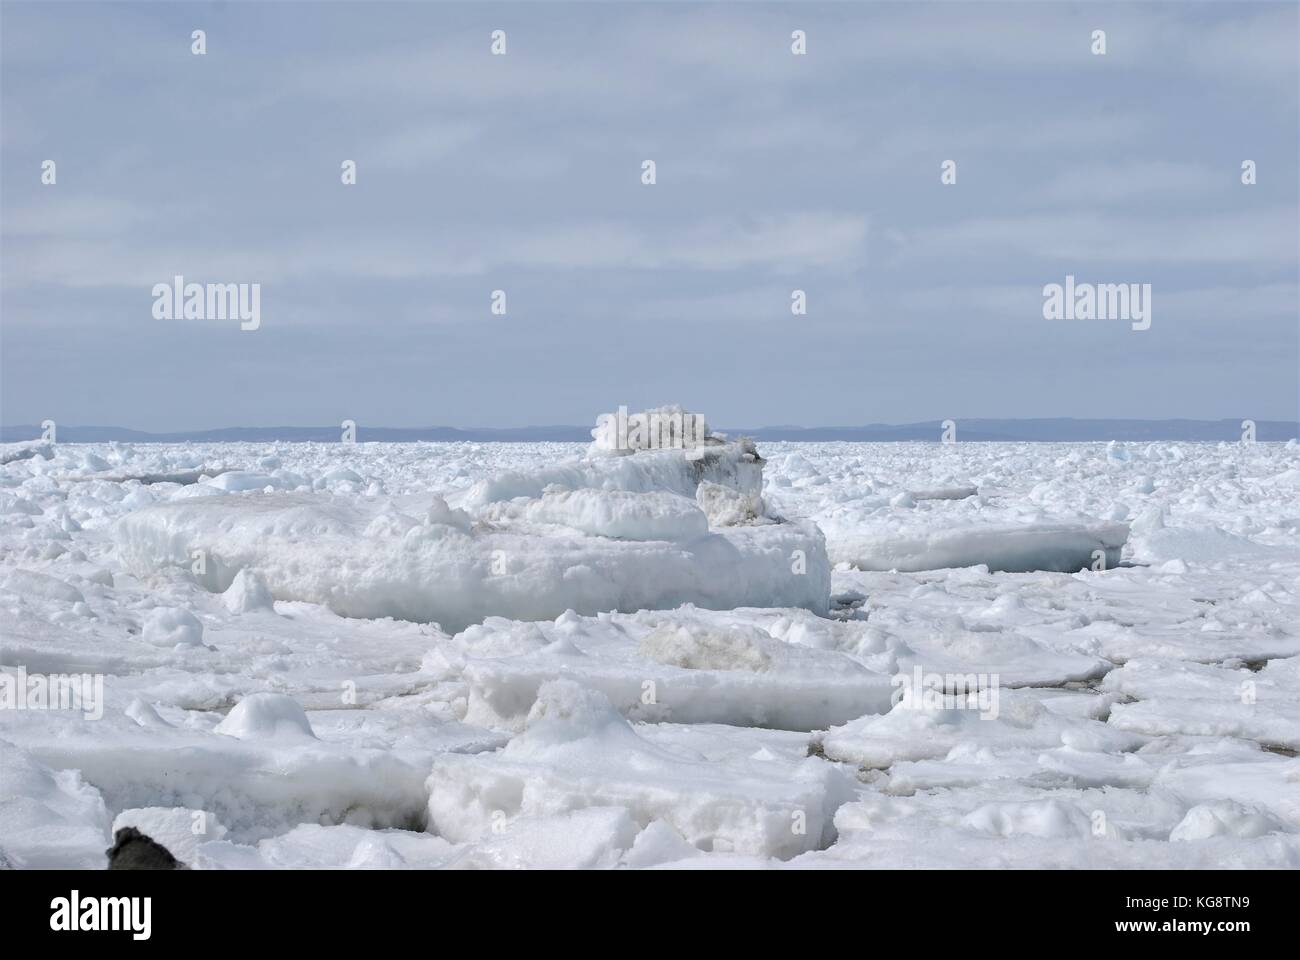 Pack Ice in the bay, Conception Bay South, Newfoundland Labrador Stock Photo